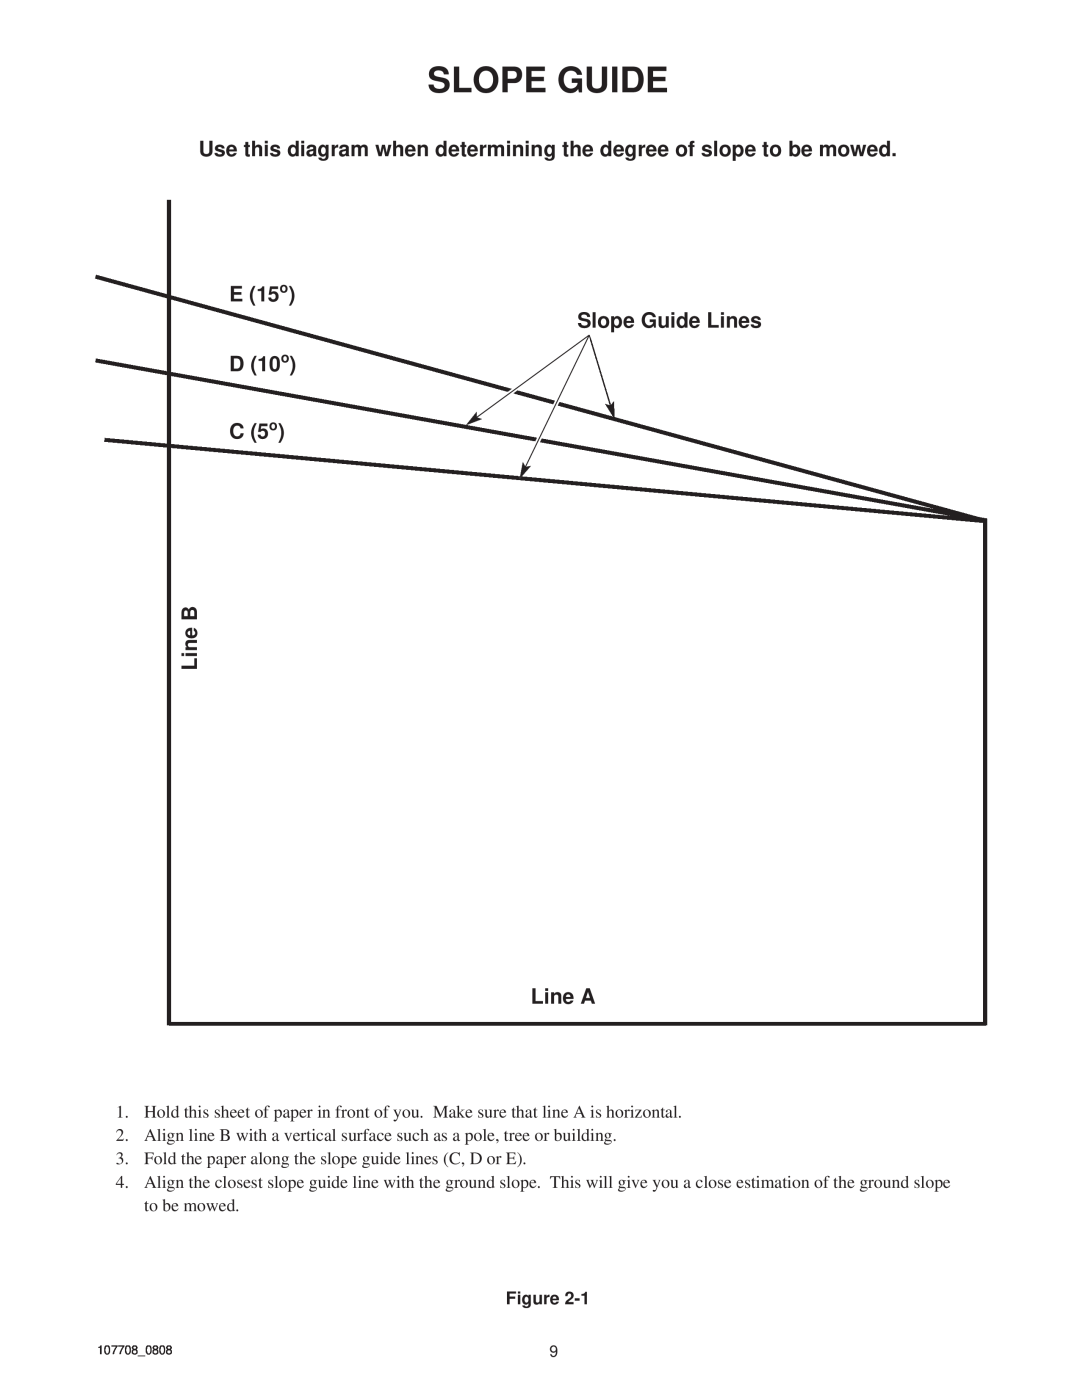 Hustler Turf Super Duty 36, Super 928192 Use this diagram when determining the degree of slope to be mowed, Slope Guide 